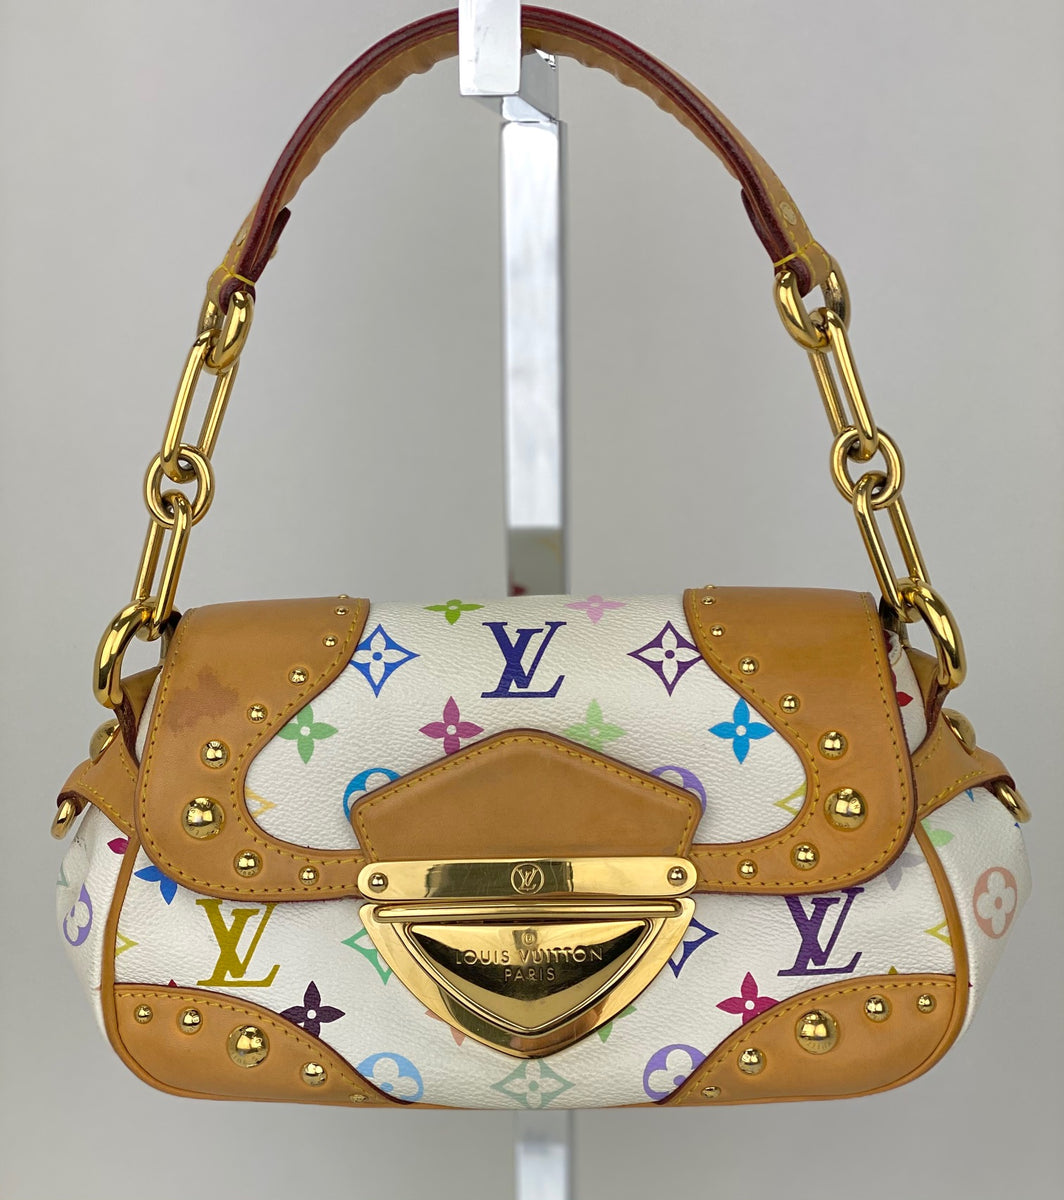 Authenticated Used LOUISVUITTON Louis Vuitton Marilyn Shoulder Bag